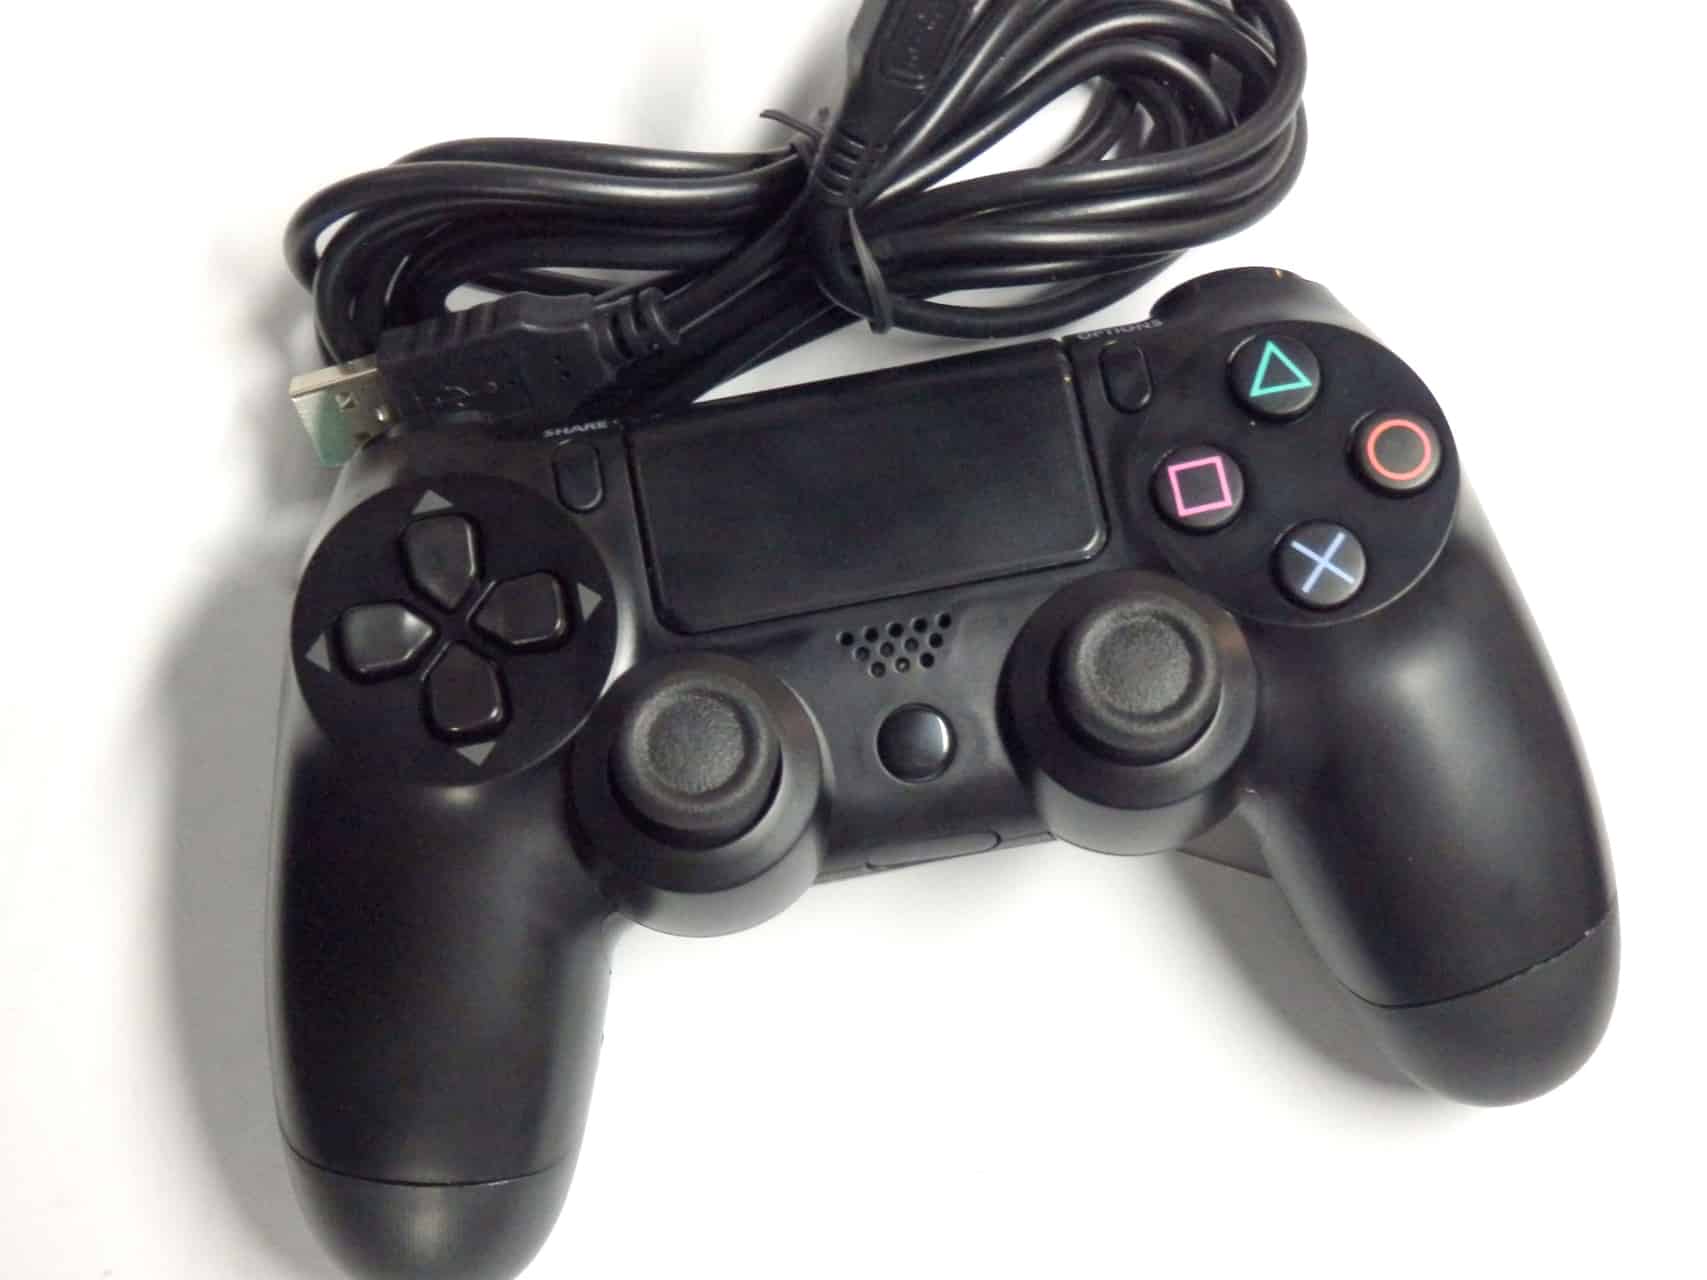 How To: Use a PS4 controller on your PC